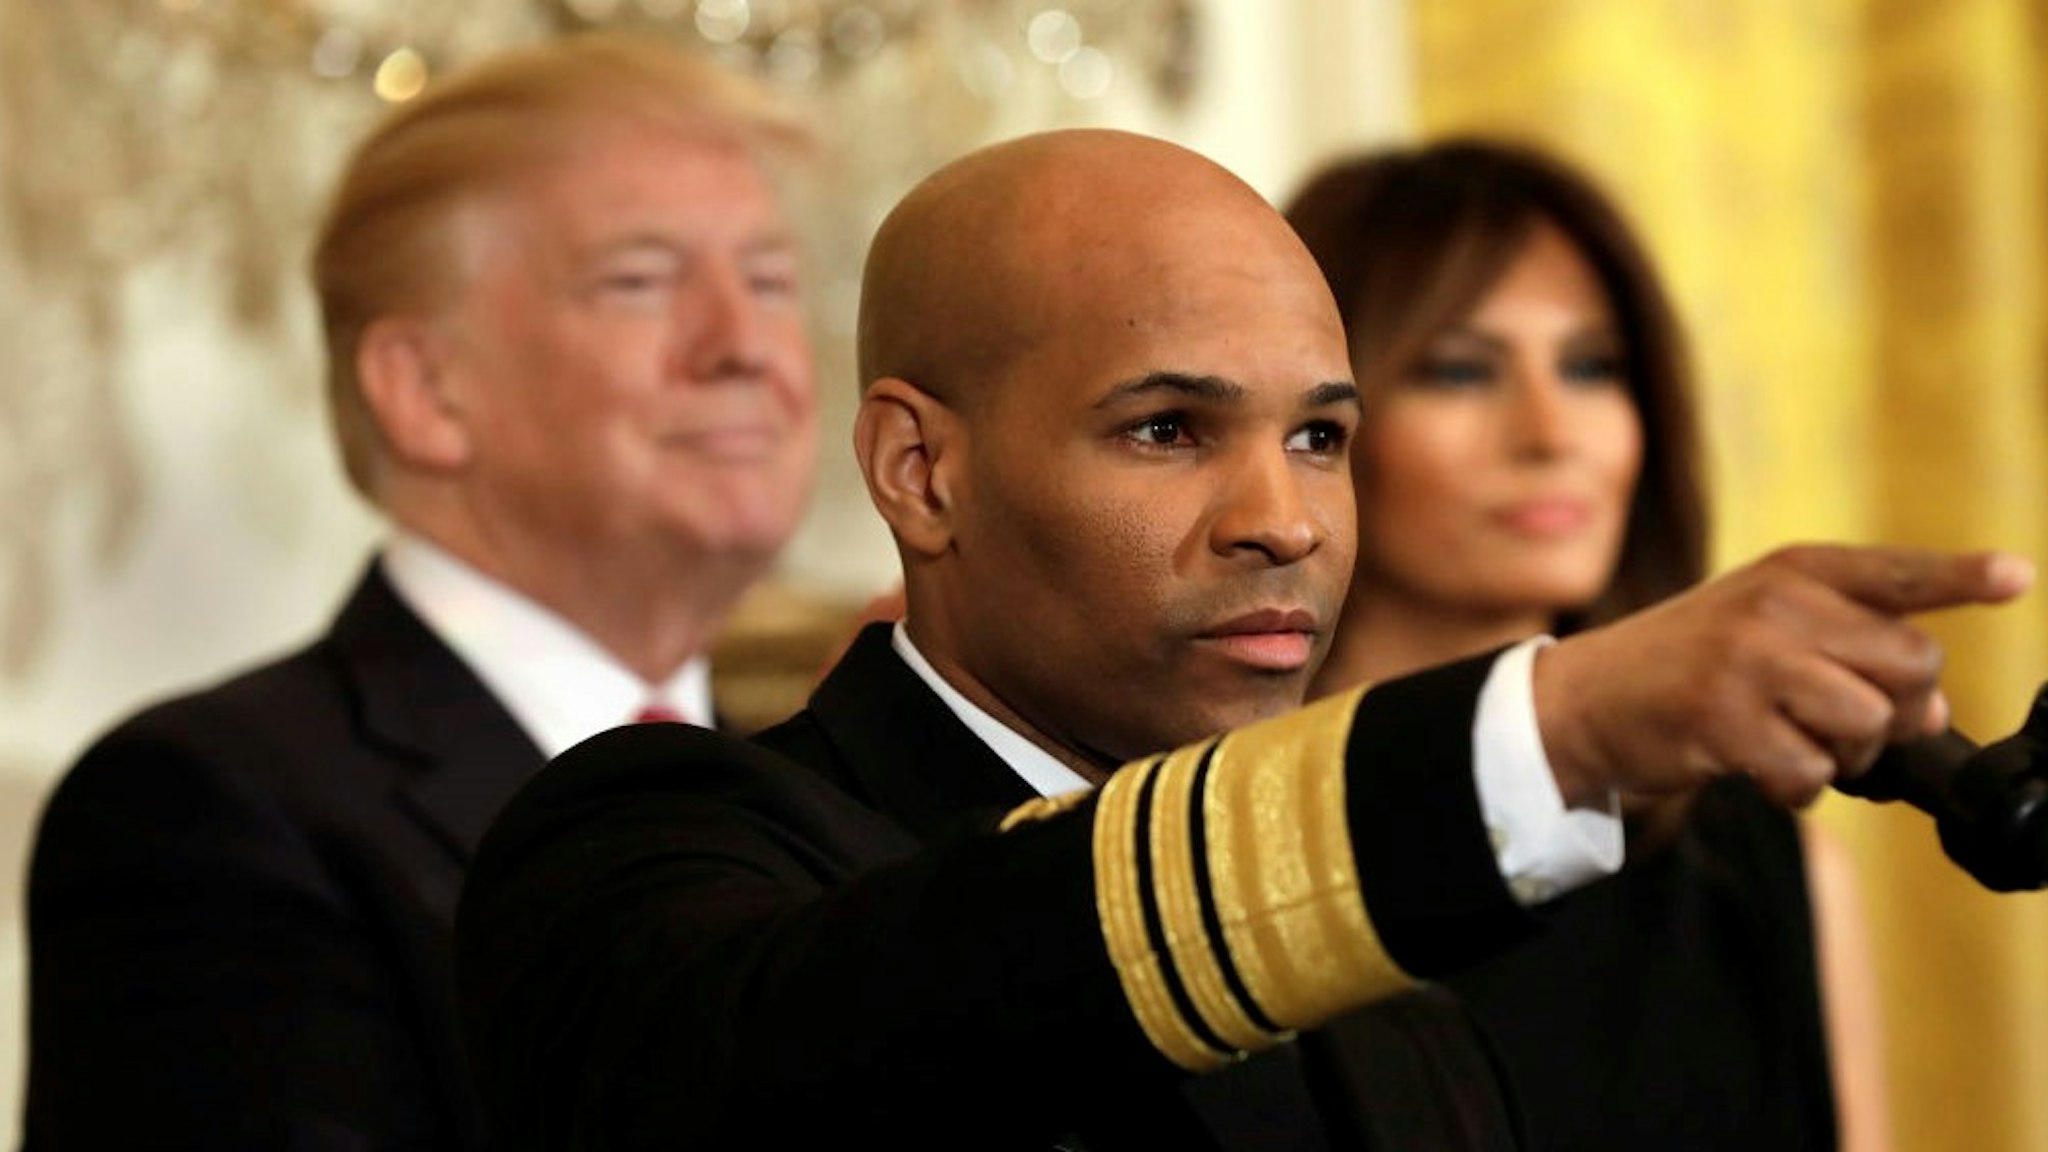 Vice Admiral Jerome Adams, the U.S. Surgeon General, gestures while speaking at an event with U.S. President Donald Trump and First Lady Melania Trump during a National African American History Month reception in Washington, D.C., U.S., on Tuesday, Feb. 13, 2018. U.S. President Donald Trump's move to end a program protecting hundreds of thousands of children of undocumented immigrants from deportation was blocked by a federal judge in New York. Its the second time in less than two months that a U.S. judge found the rescinding of the program as proposed would be wrong. Photographer: